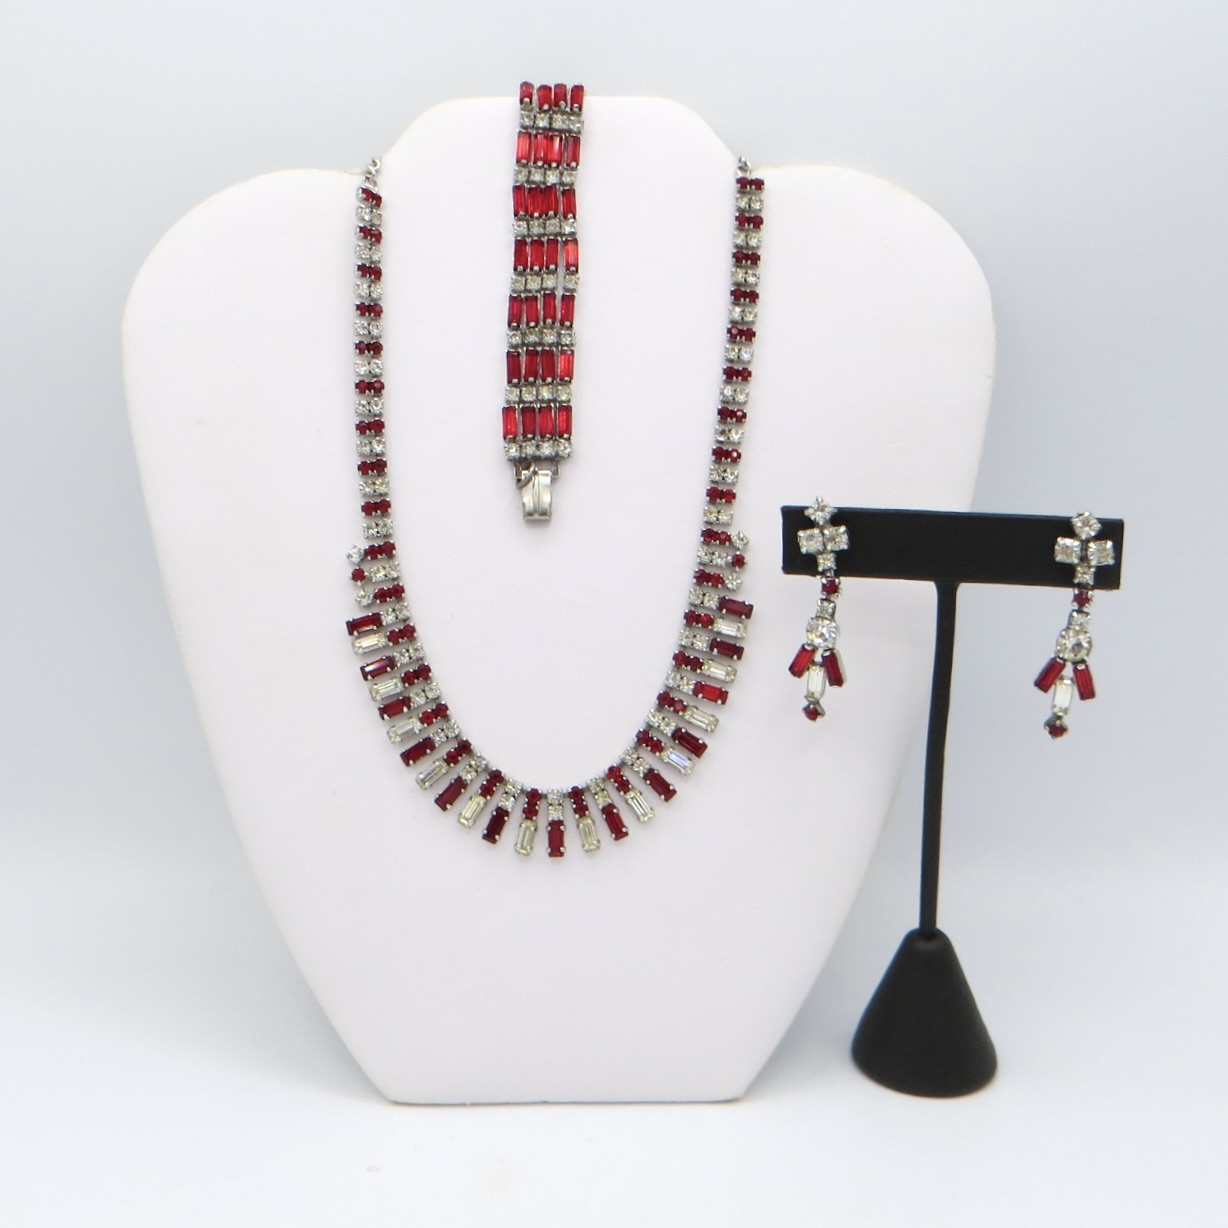 Costume Necklace, Bracelet and Earrings Set